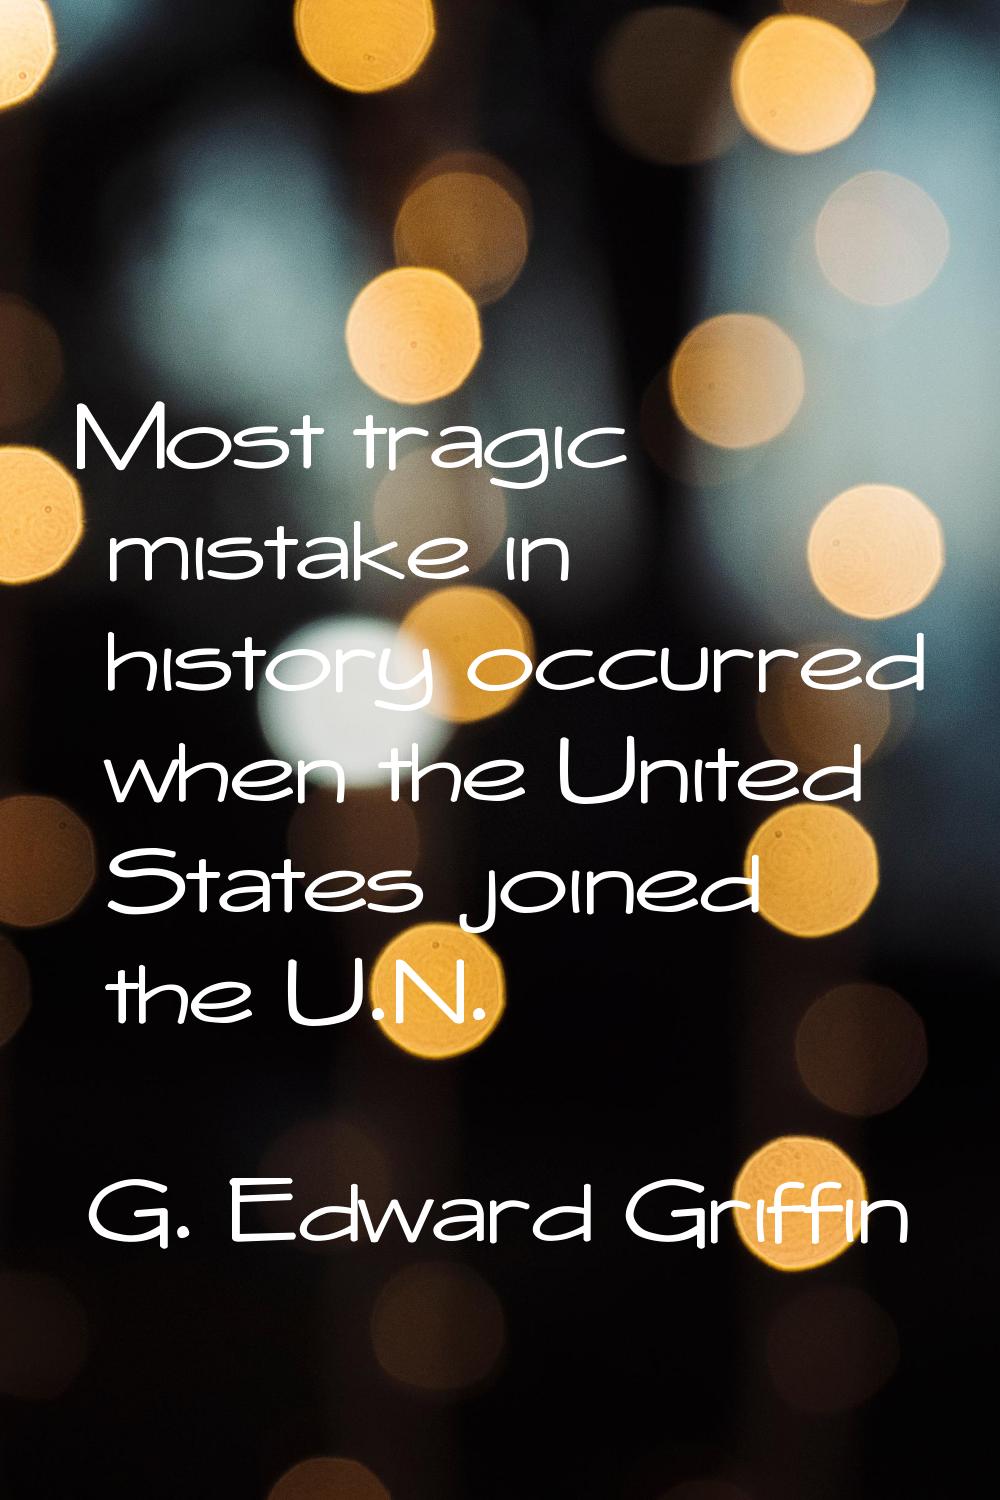 Most tragic mistake in history occurred when the United States joined the U.N.